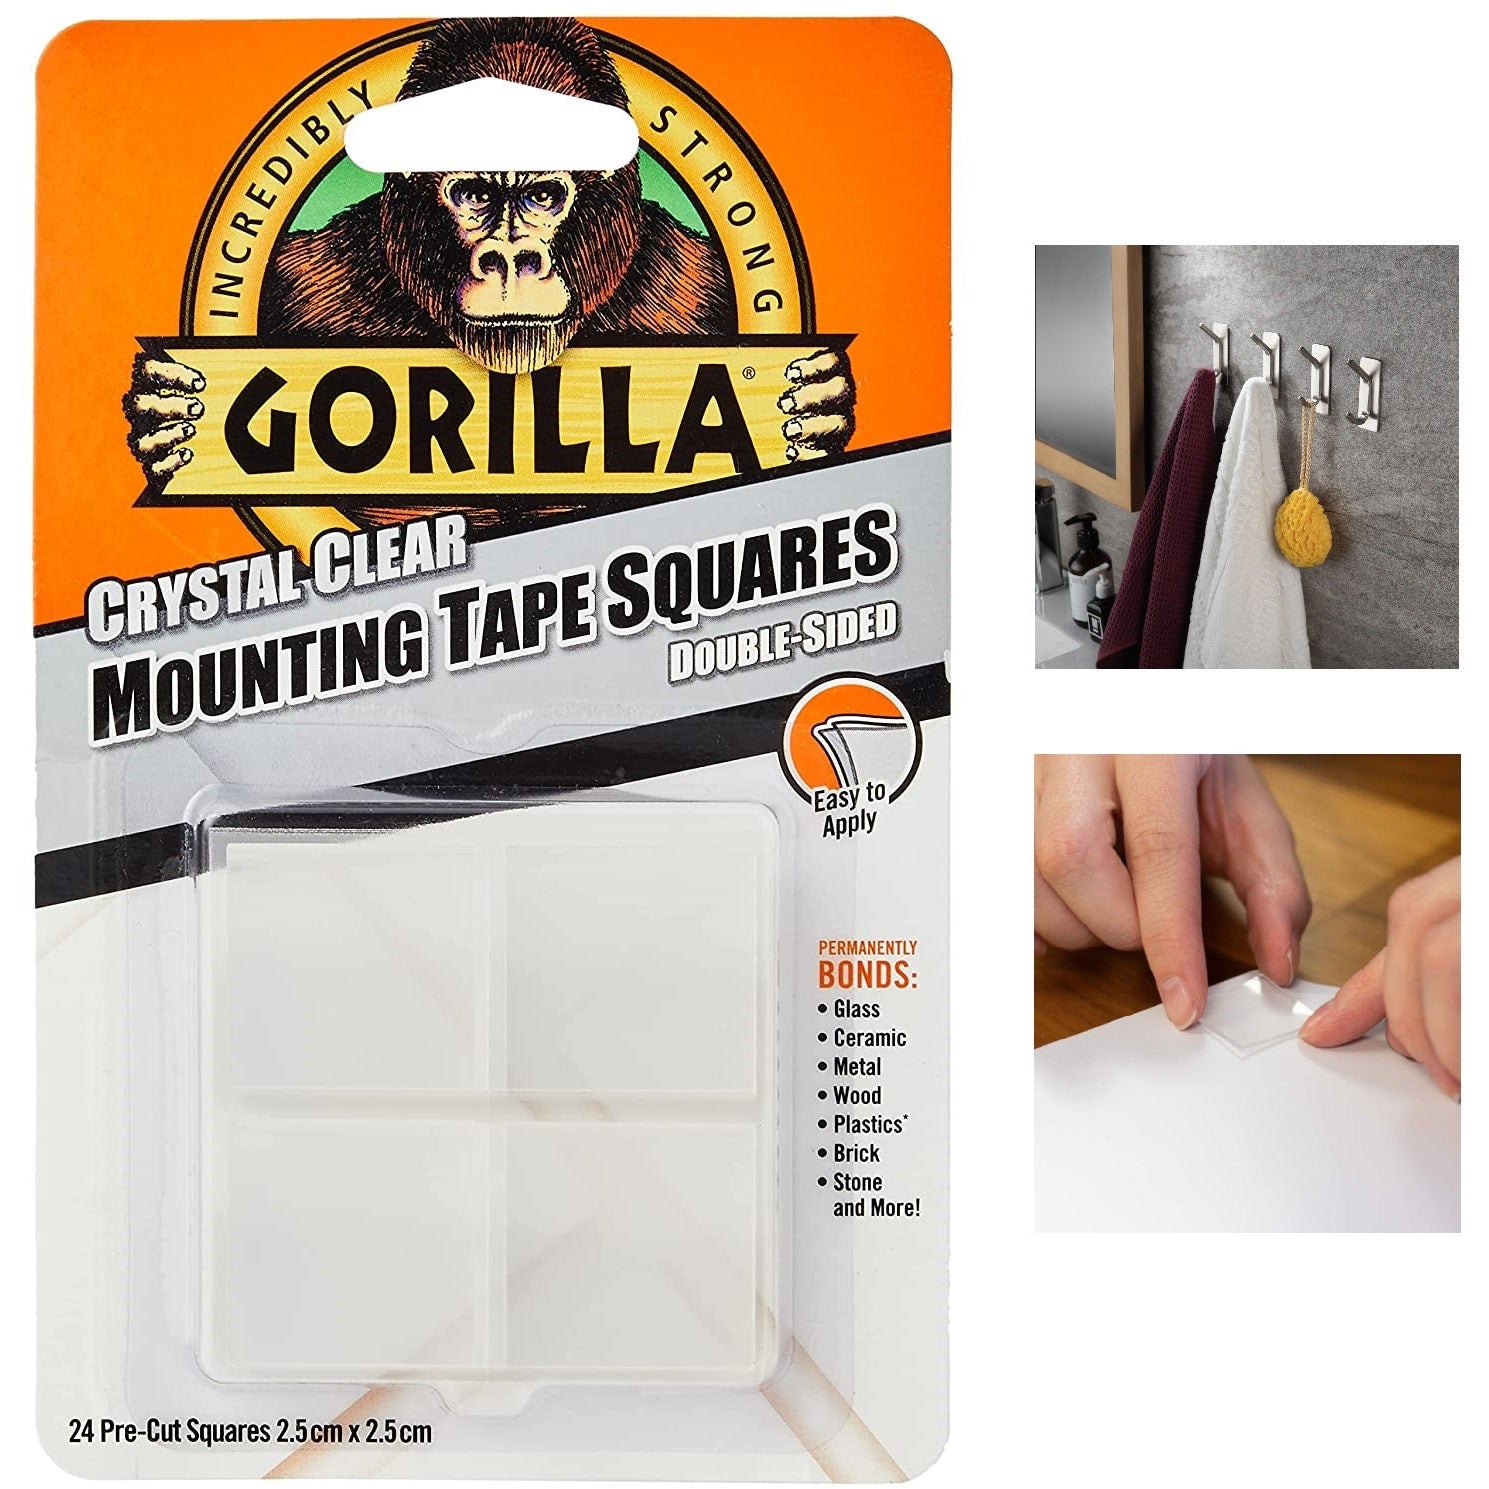 Gorilla Mounting Tabs Squares Double Sided Tape Sticky Pads